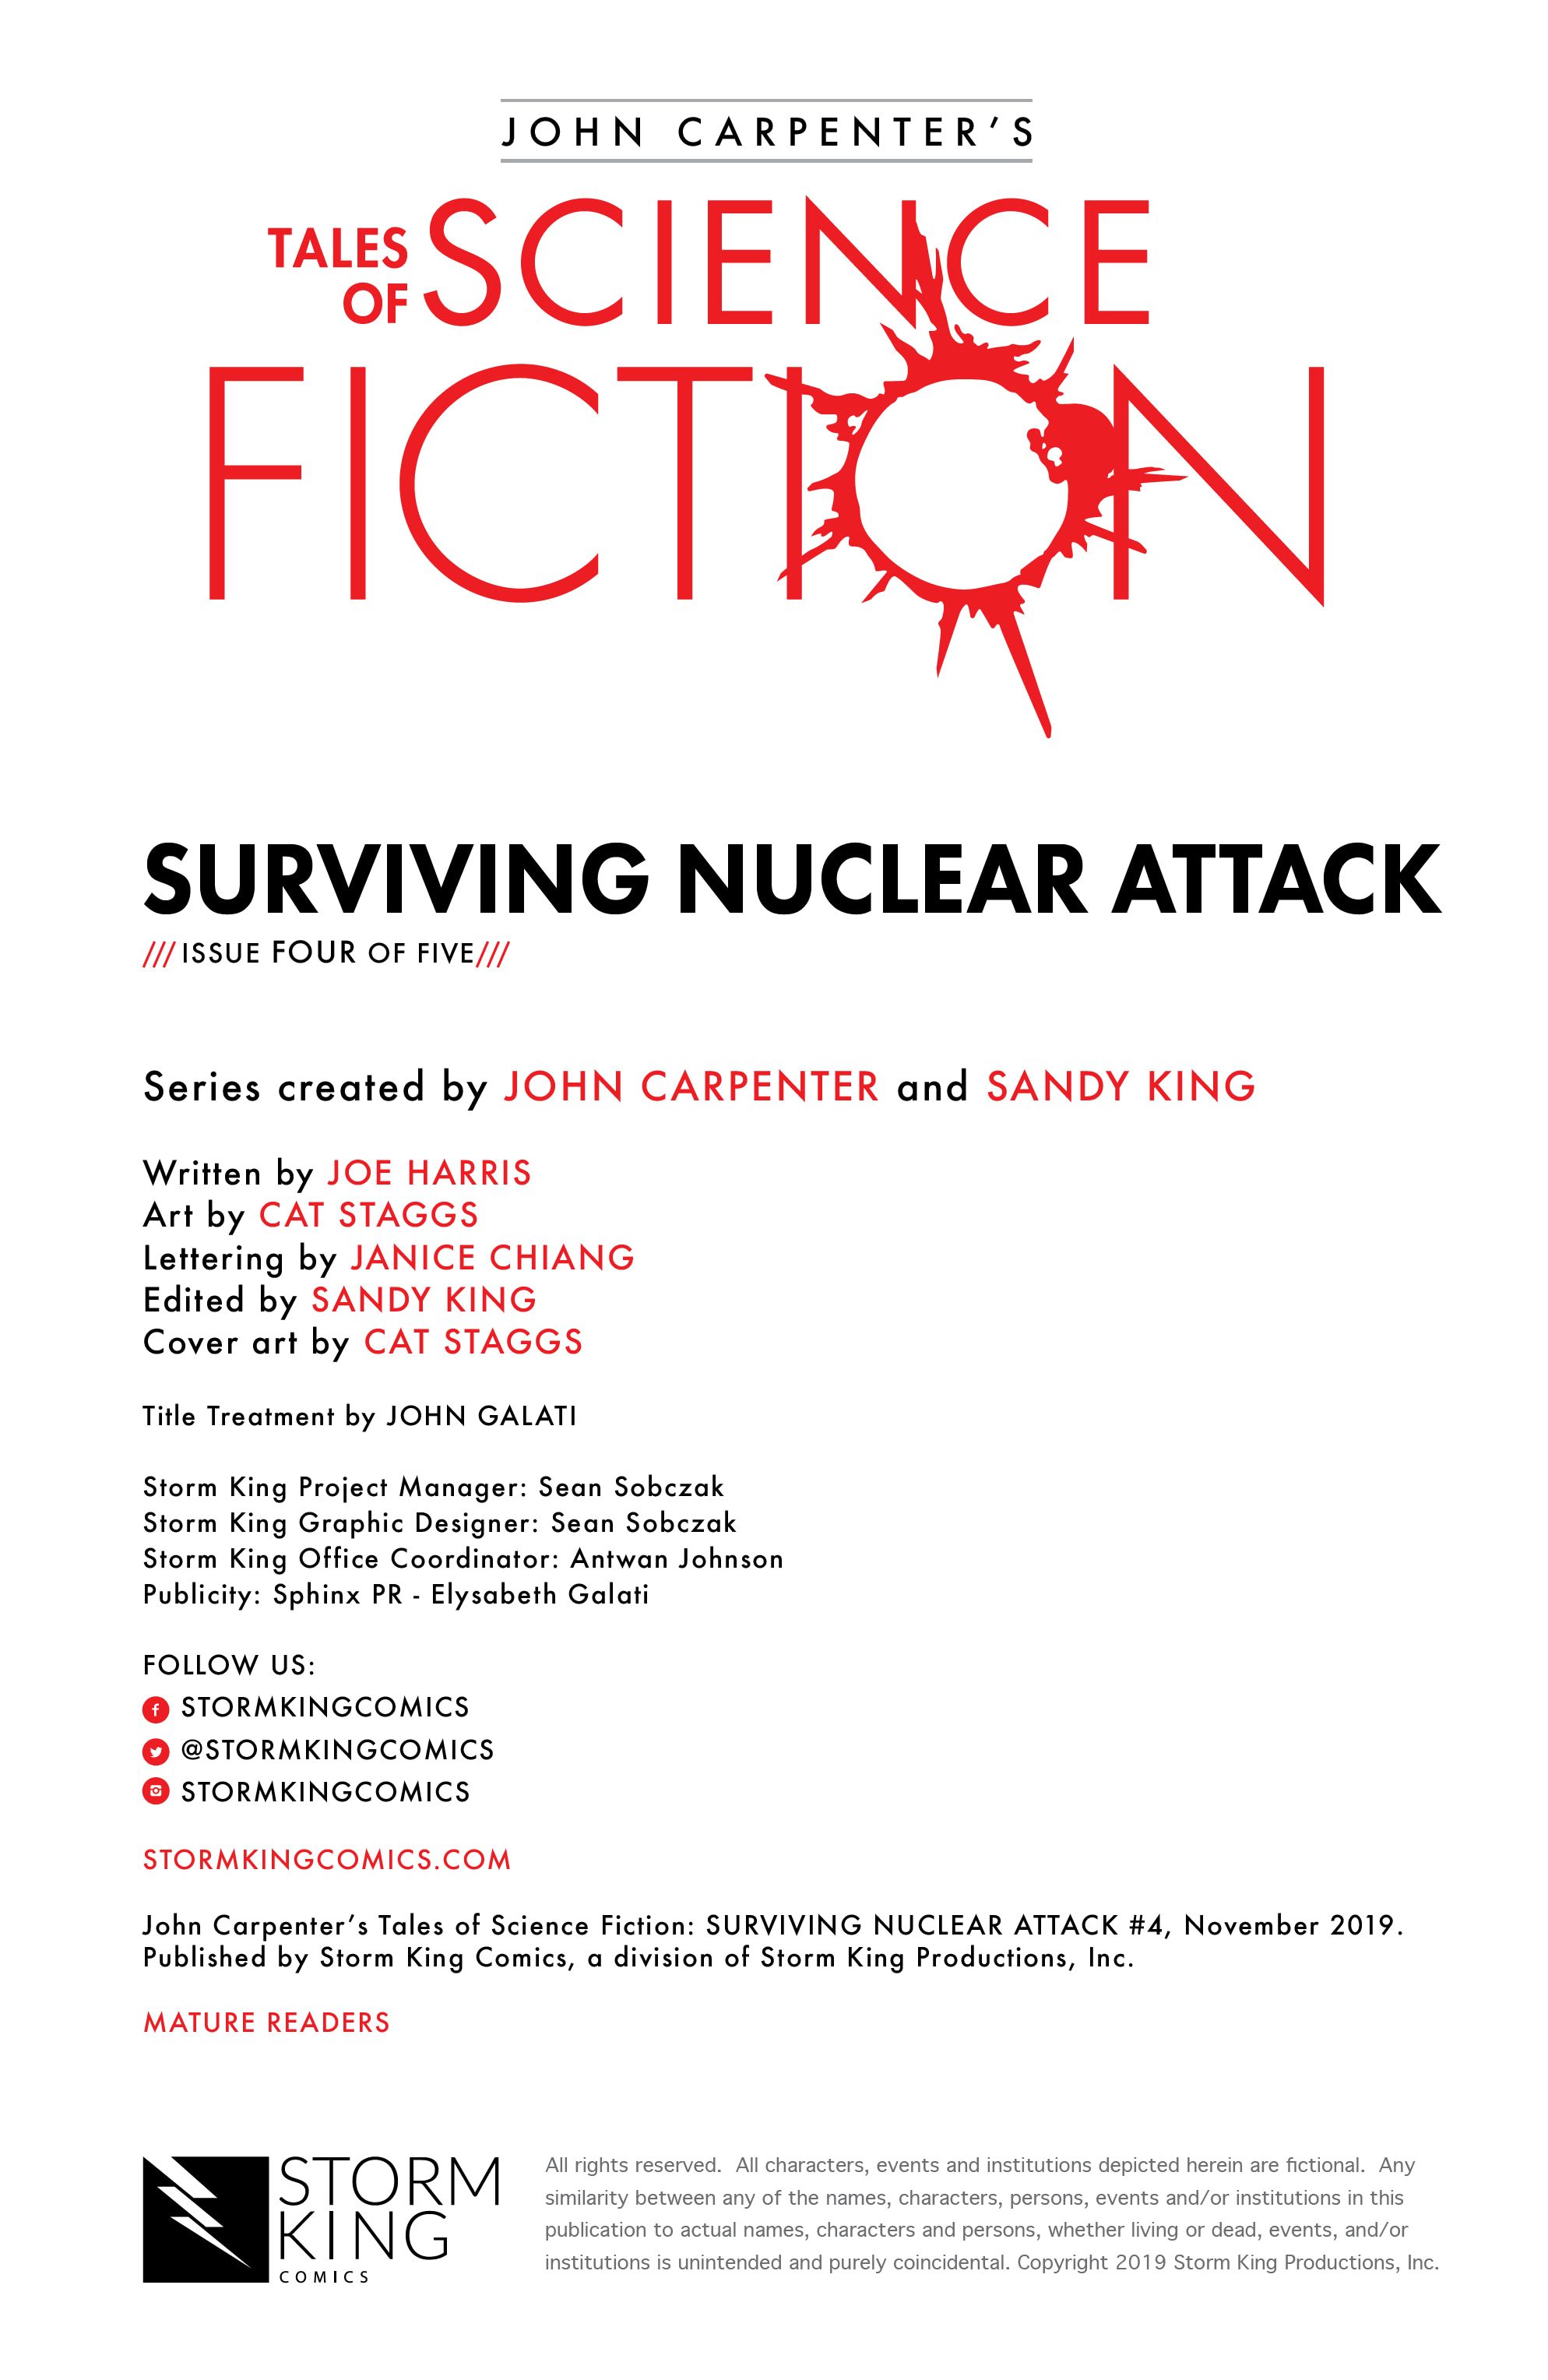 Read online John Carpenter's Tales of Science Fiction: Surviving Nuclear Attack comic -  Issue #4 - 2